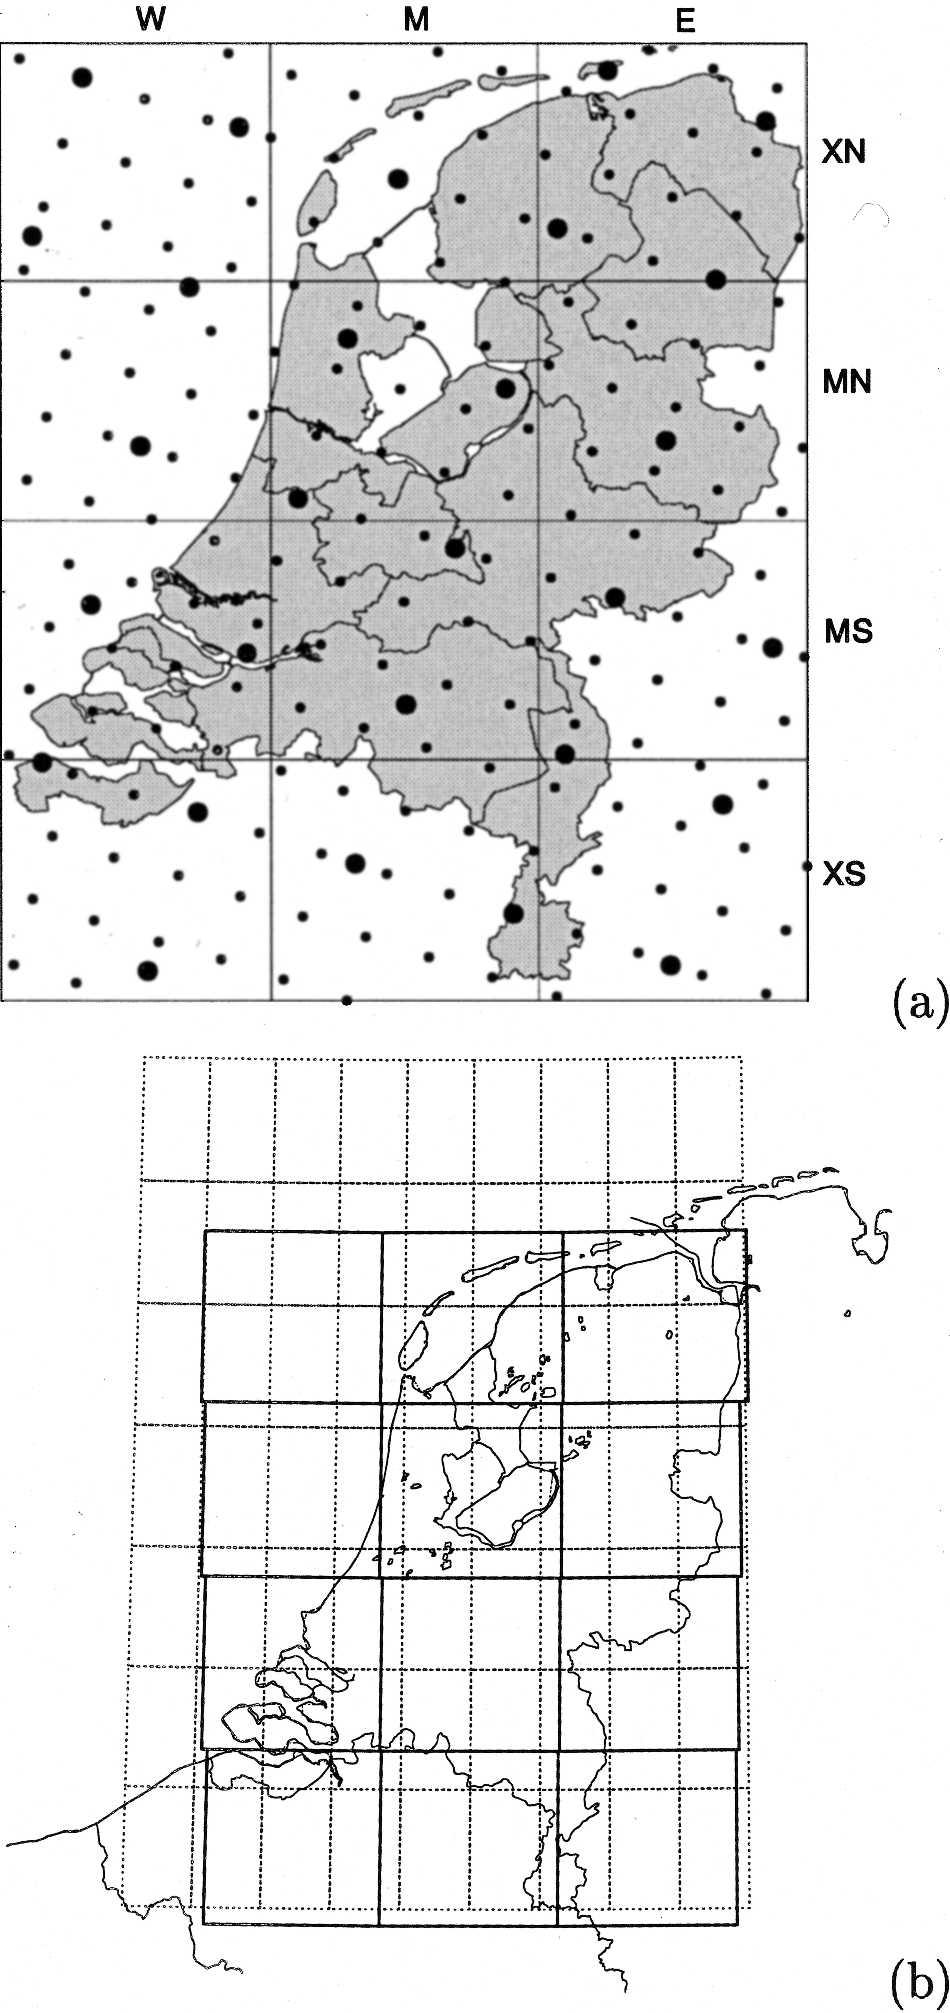 APRIL 2005 SCHMEITS ET AL. 135 FIG. 1. (a) Geography of the Netherlands (gray shaded) and surroundings, subdivided in 12 regions (W: west, M: middle, E: east, N: north, S: south, and X: extreme).